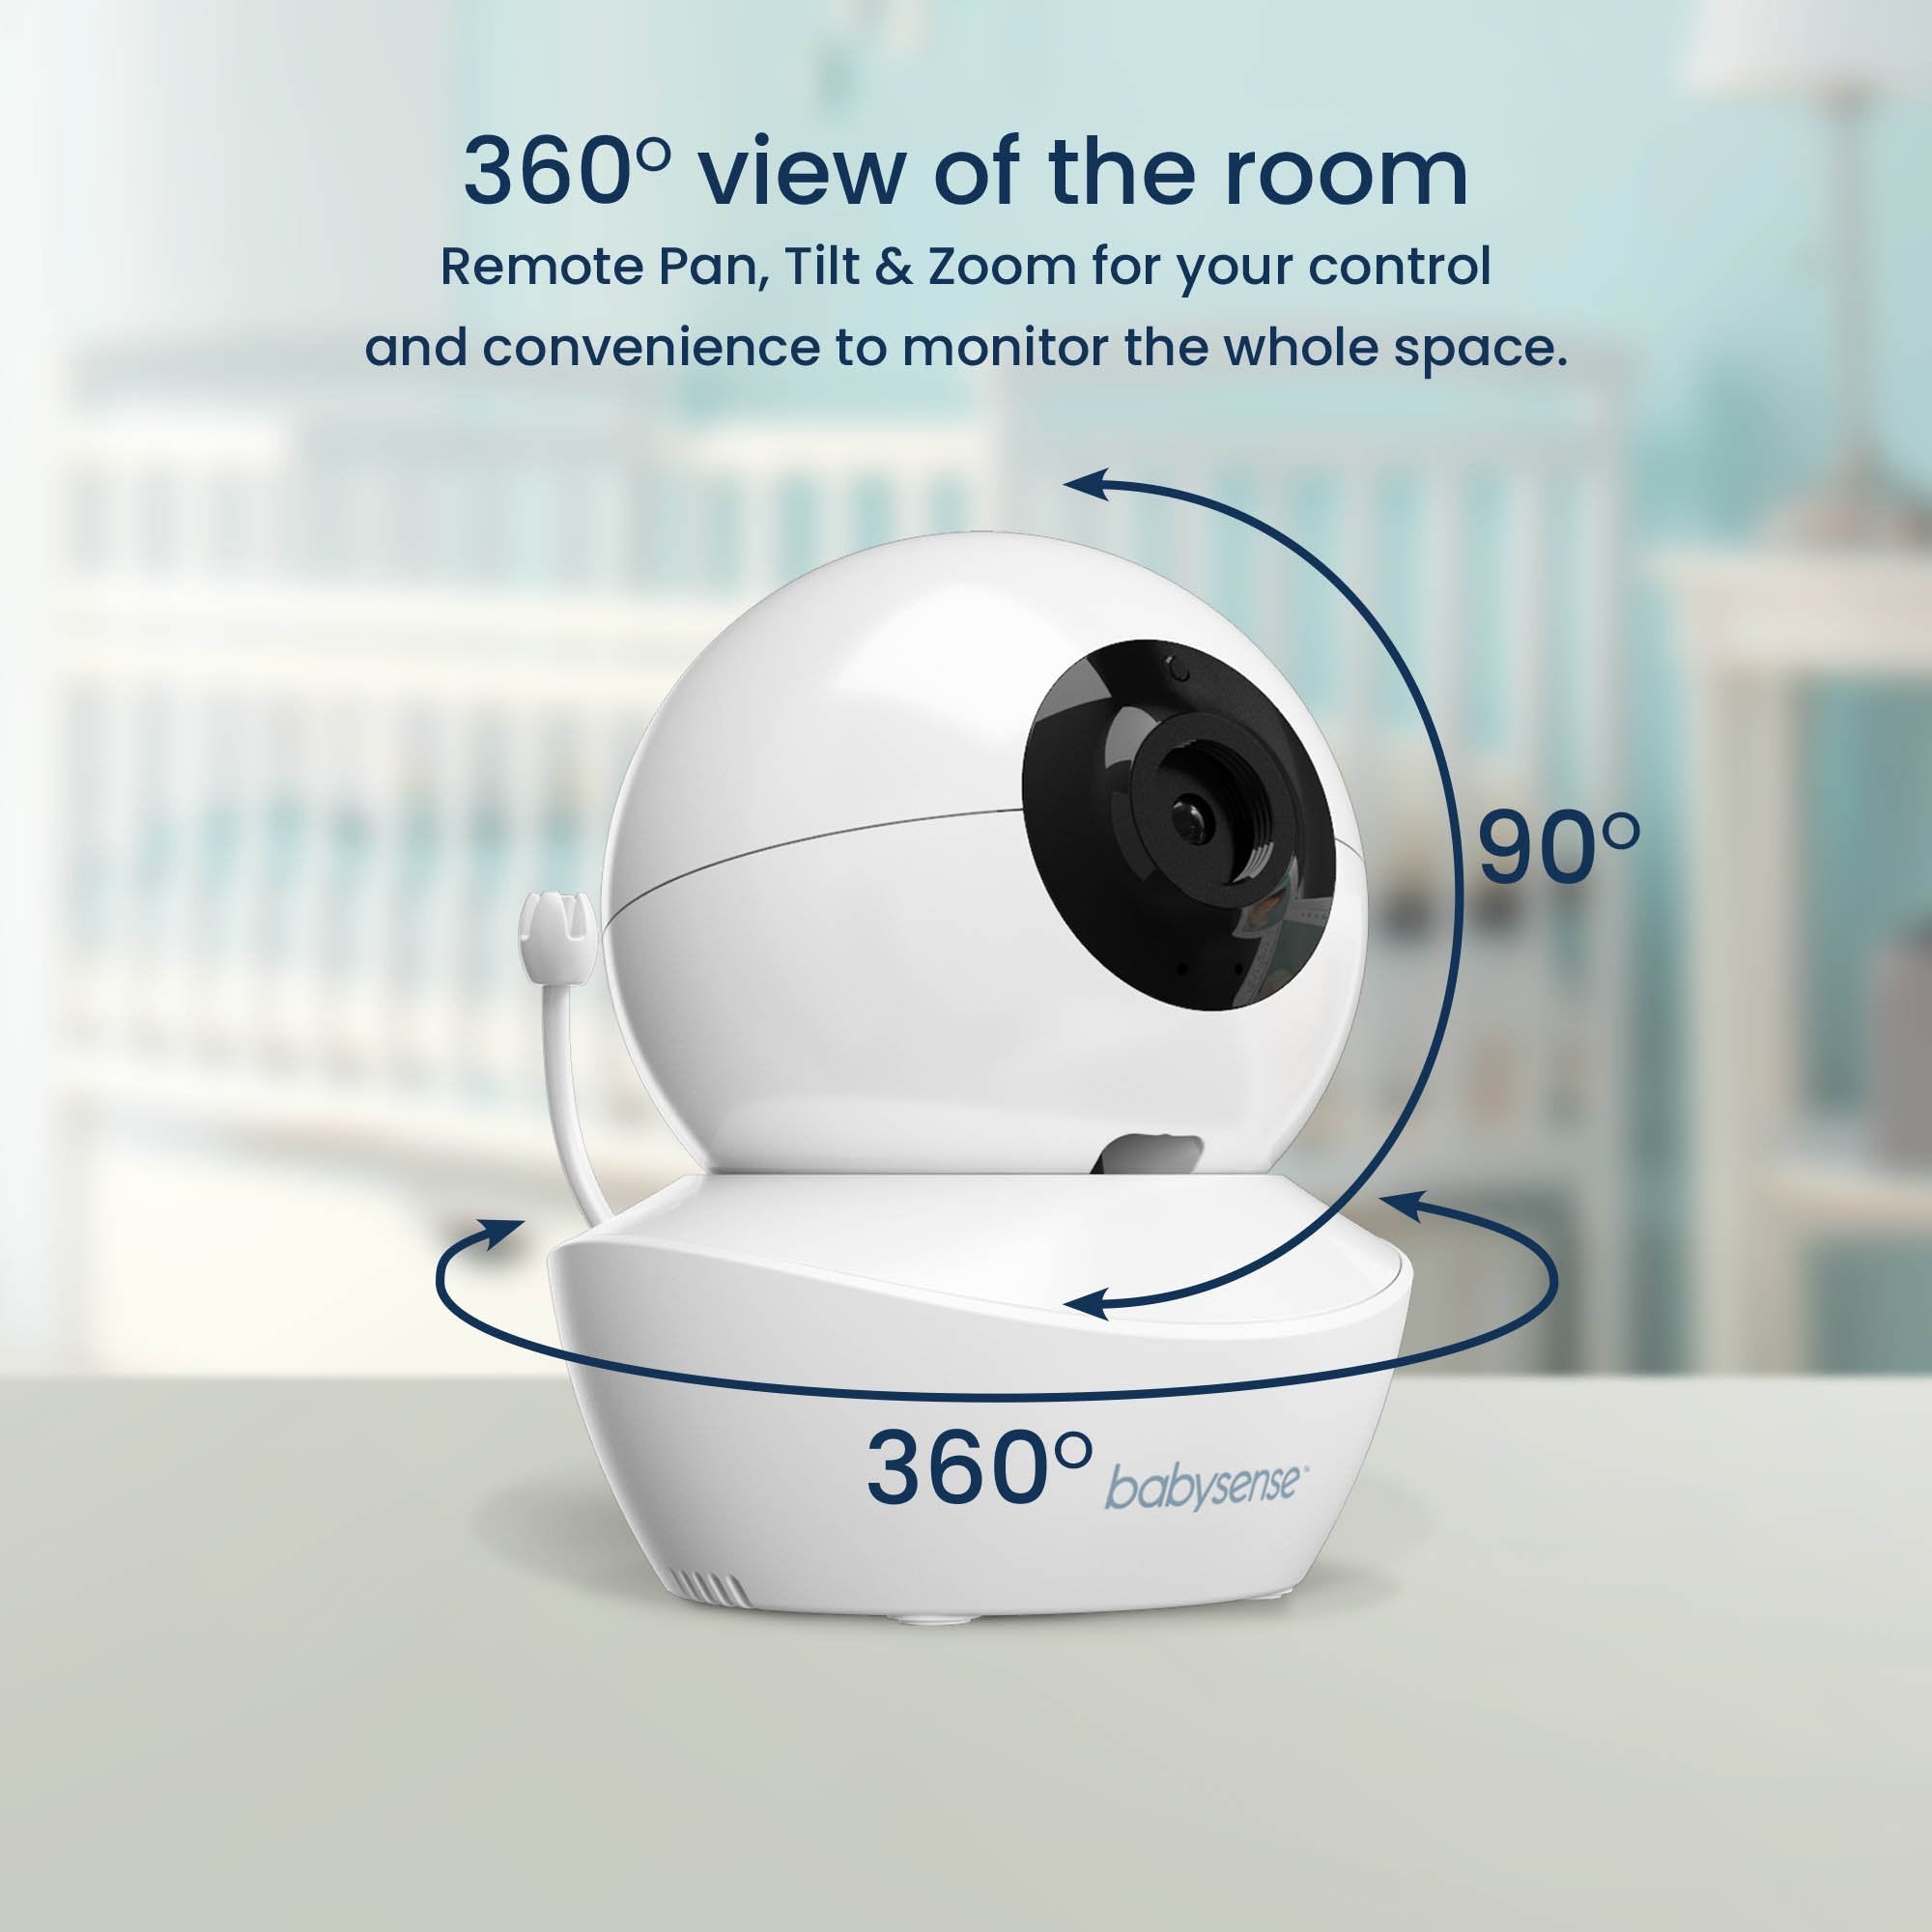 Add-On Camera for Video Baby Monitor HD S2 - Babysense